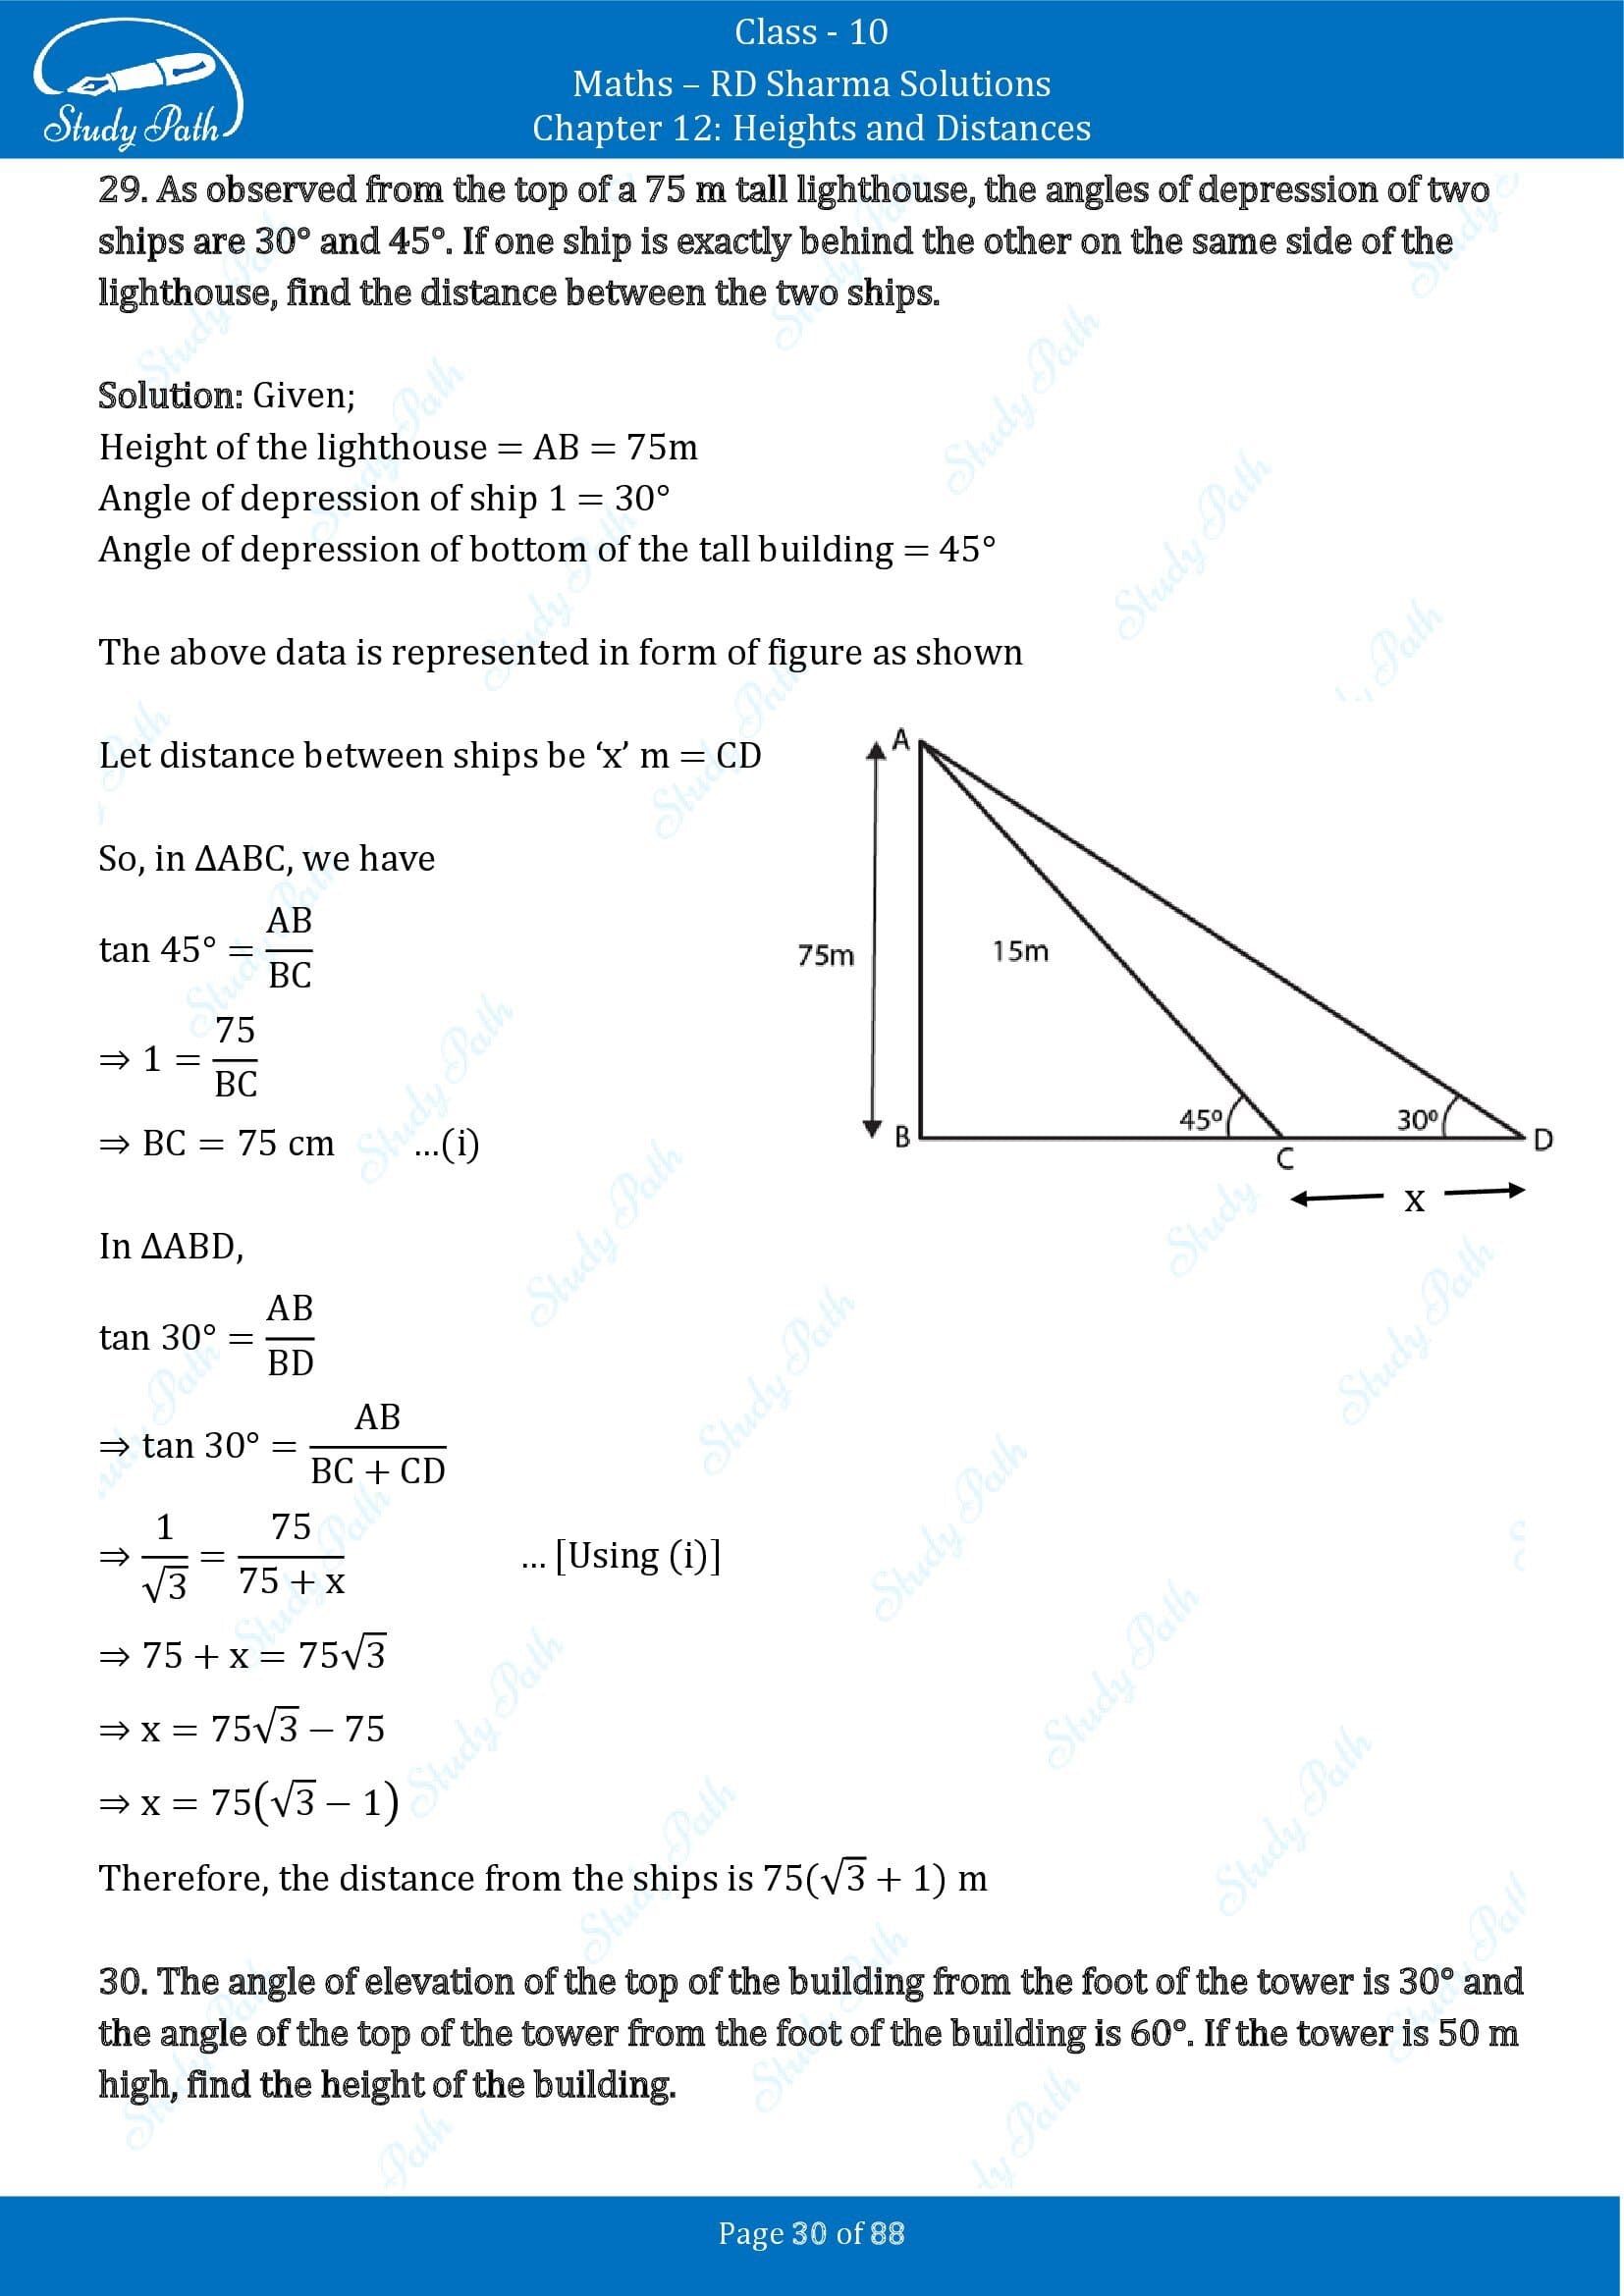 RD Sharma Solutions Class 10 Chapter 12 Heights and Distances Exercise 12.1 00030